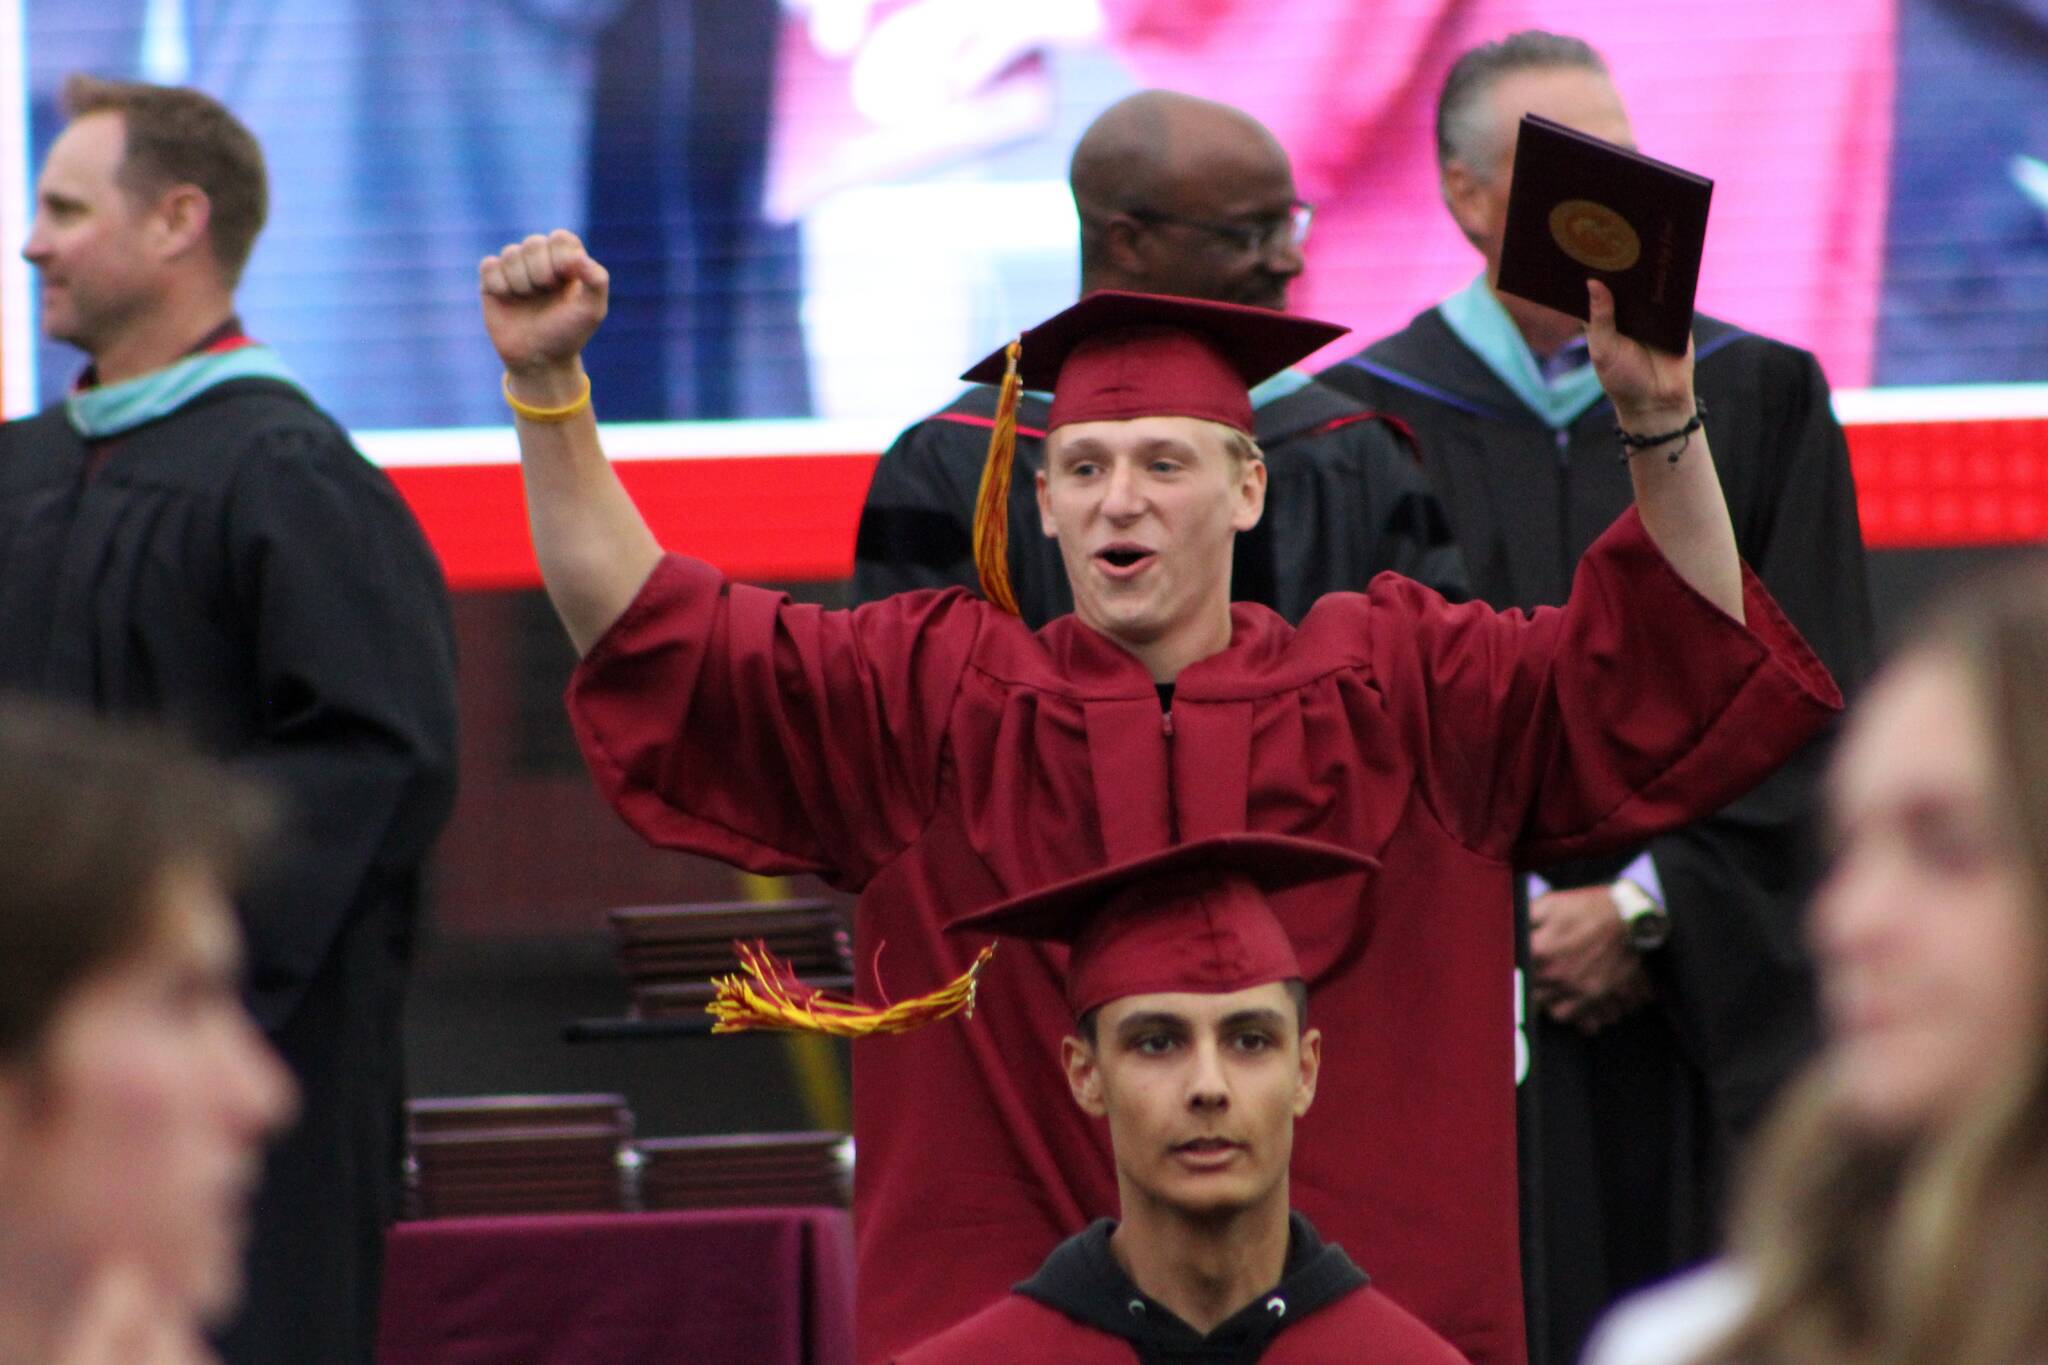 A student celebrates receiving his diploma. Alex Bruell / Sound Publishing.